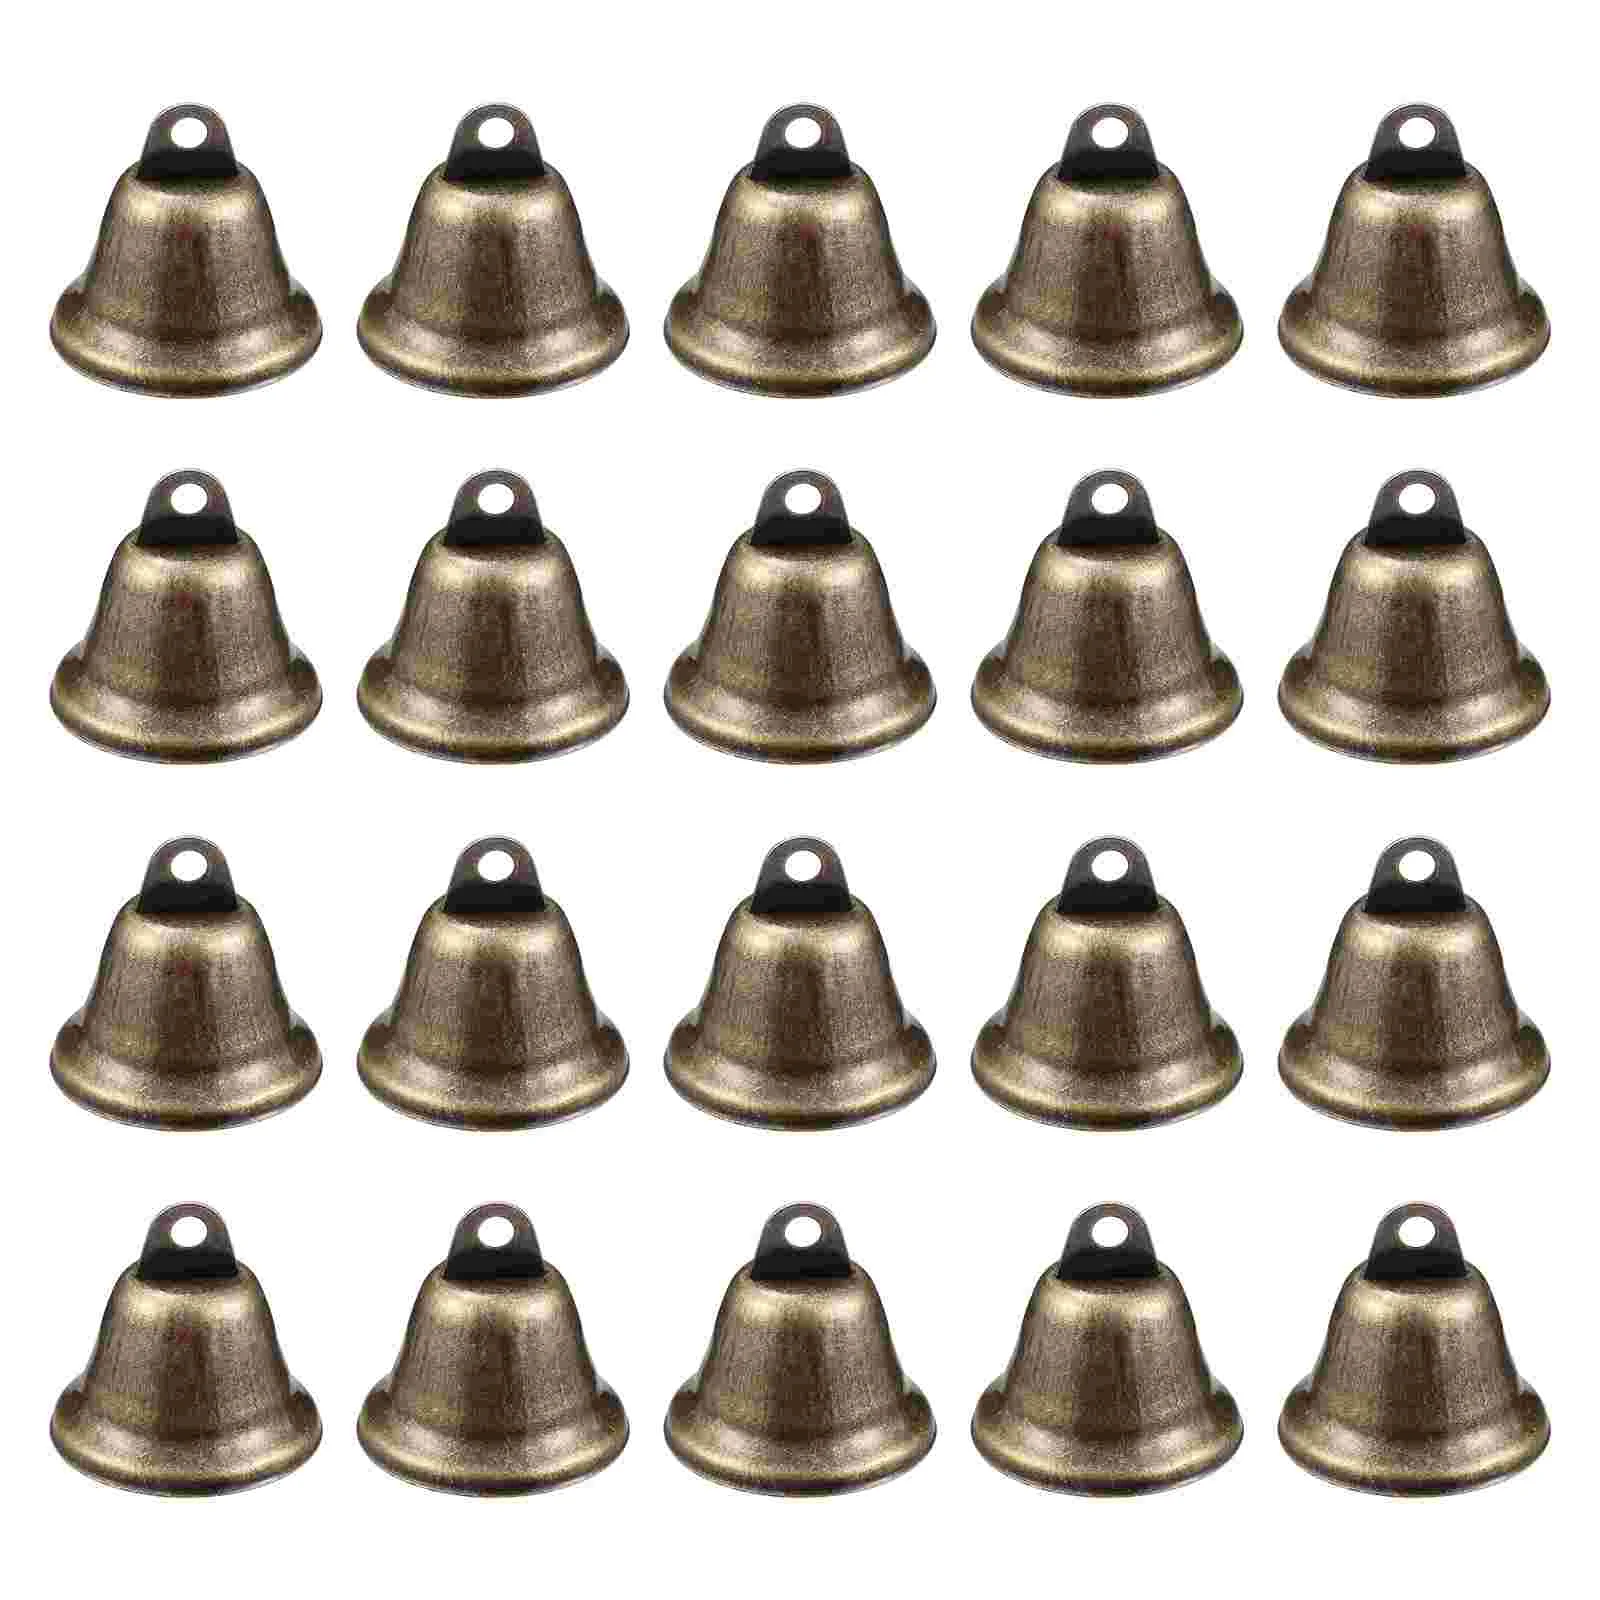 

20 Pcs Bells for Crafts 1 Inch Brass Bell Hangings